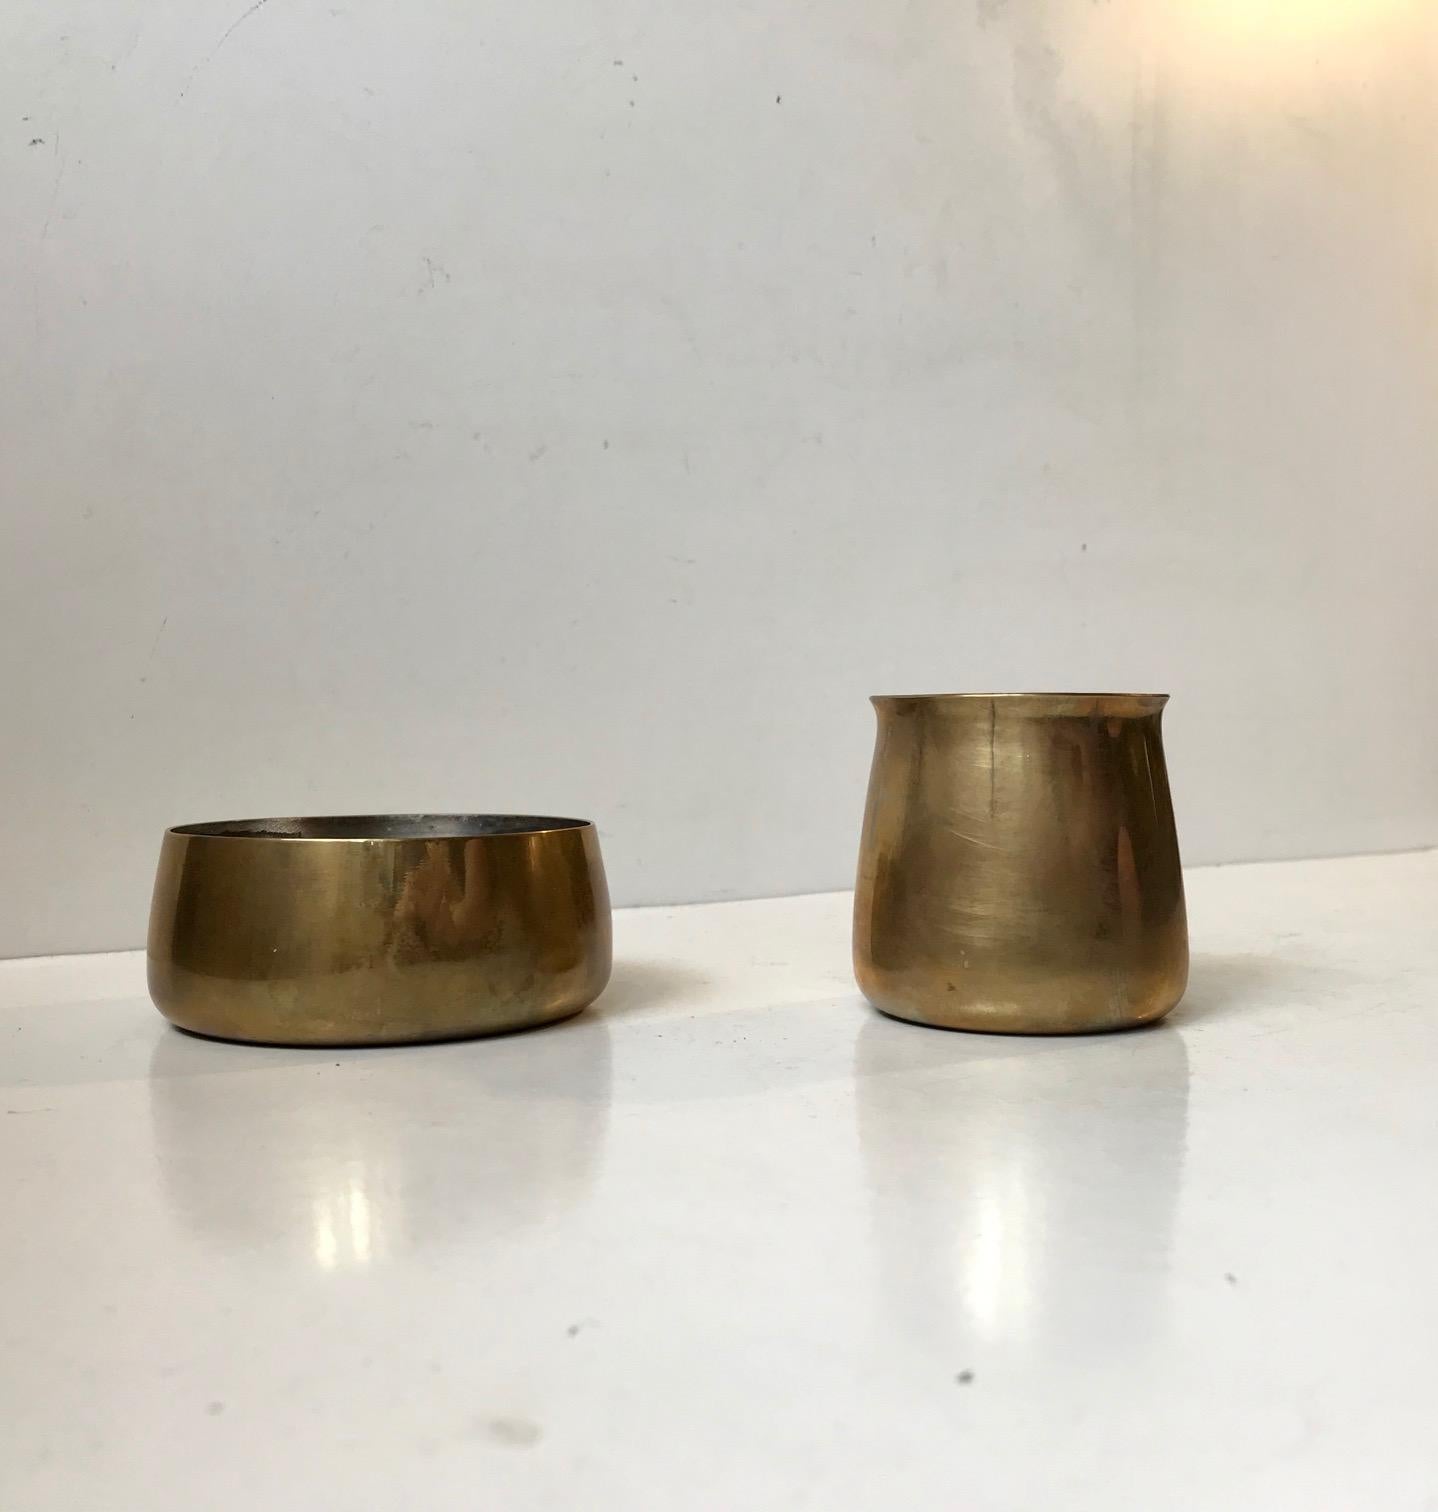 A rare set consisting of a small creamer and sugar bowl in solid brass lined with pewter. Designed by Henning Koppel and manufactured by Georg Jensen in Denmark for a brief time during the 1960s. Measurements: D: 8.6/6 cm, Heights: 6.5/4 cm. The set